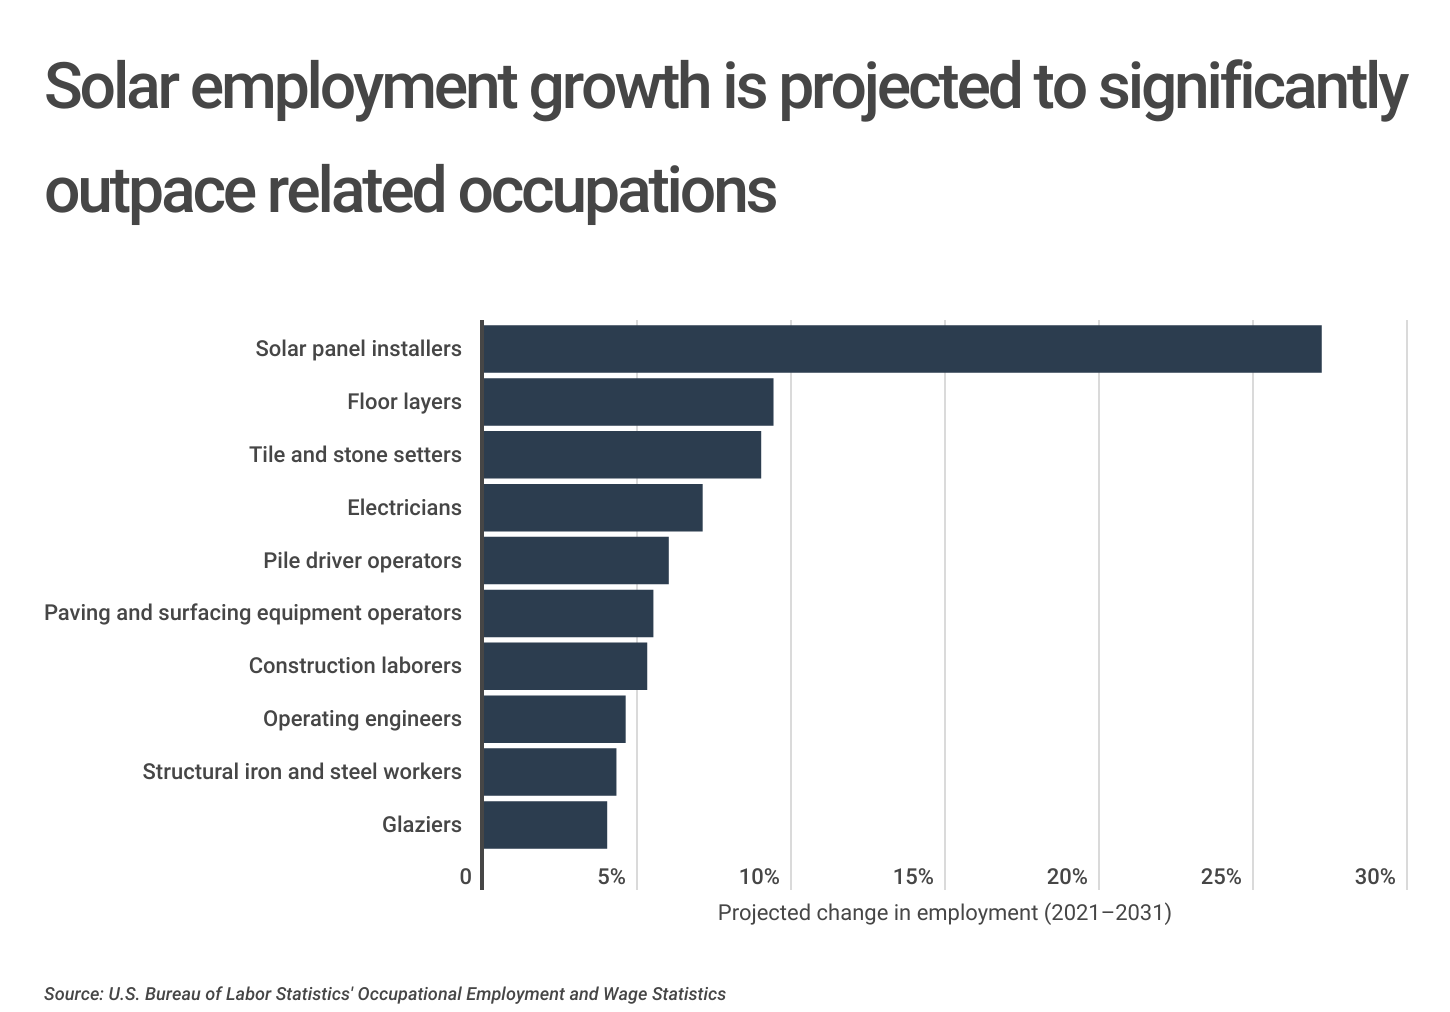 Chart2_Solar employment growth is projected to outpace related occupations